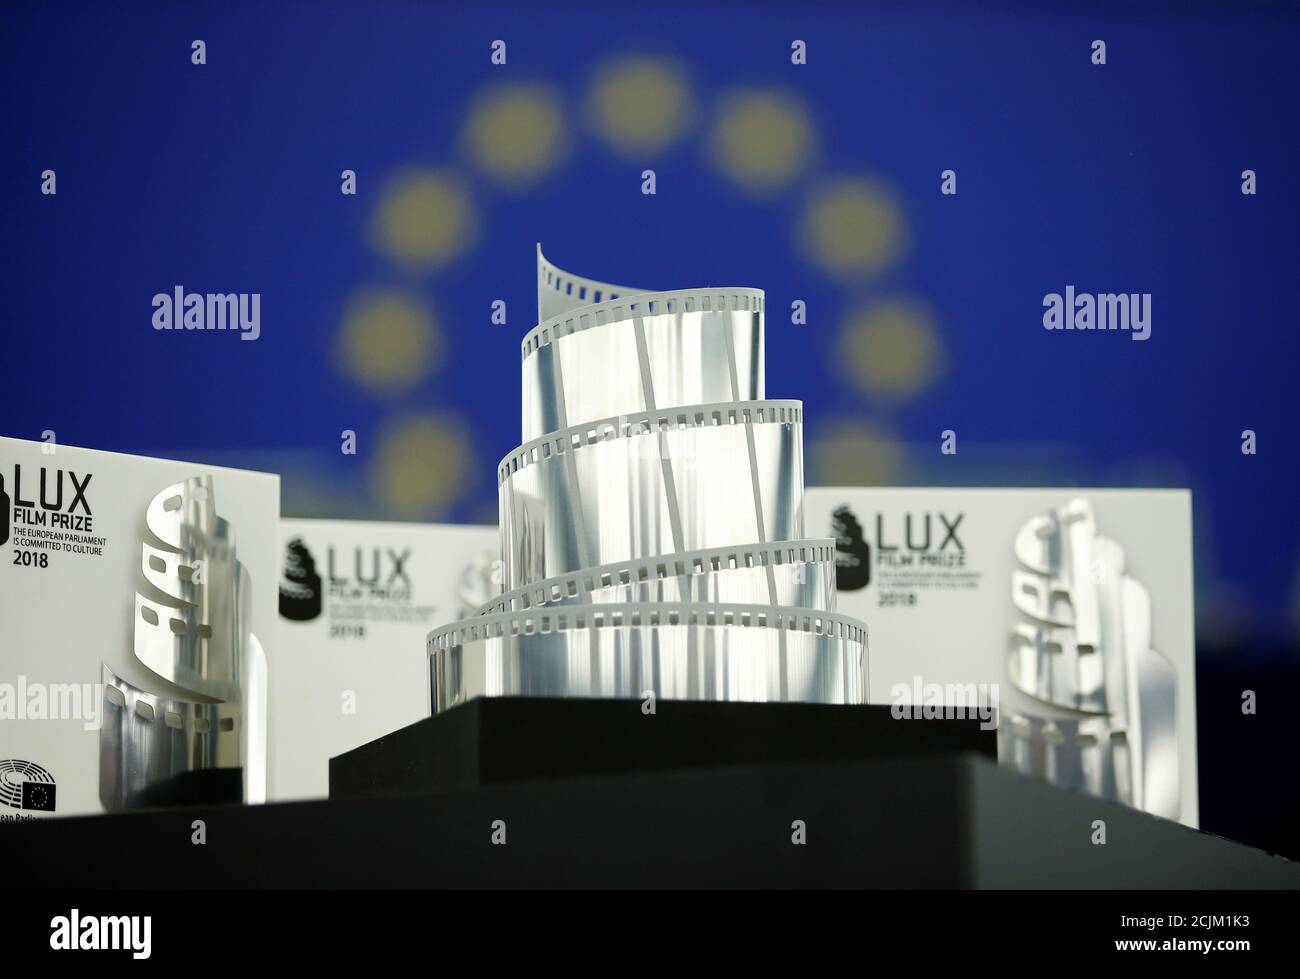 The Lux cinema prize from the European Parliament is seen during the award ceremony at the European Parliament in Strasbourg, France, November 14, 2018. REUTERS/Vincent Kessler Stock Photo